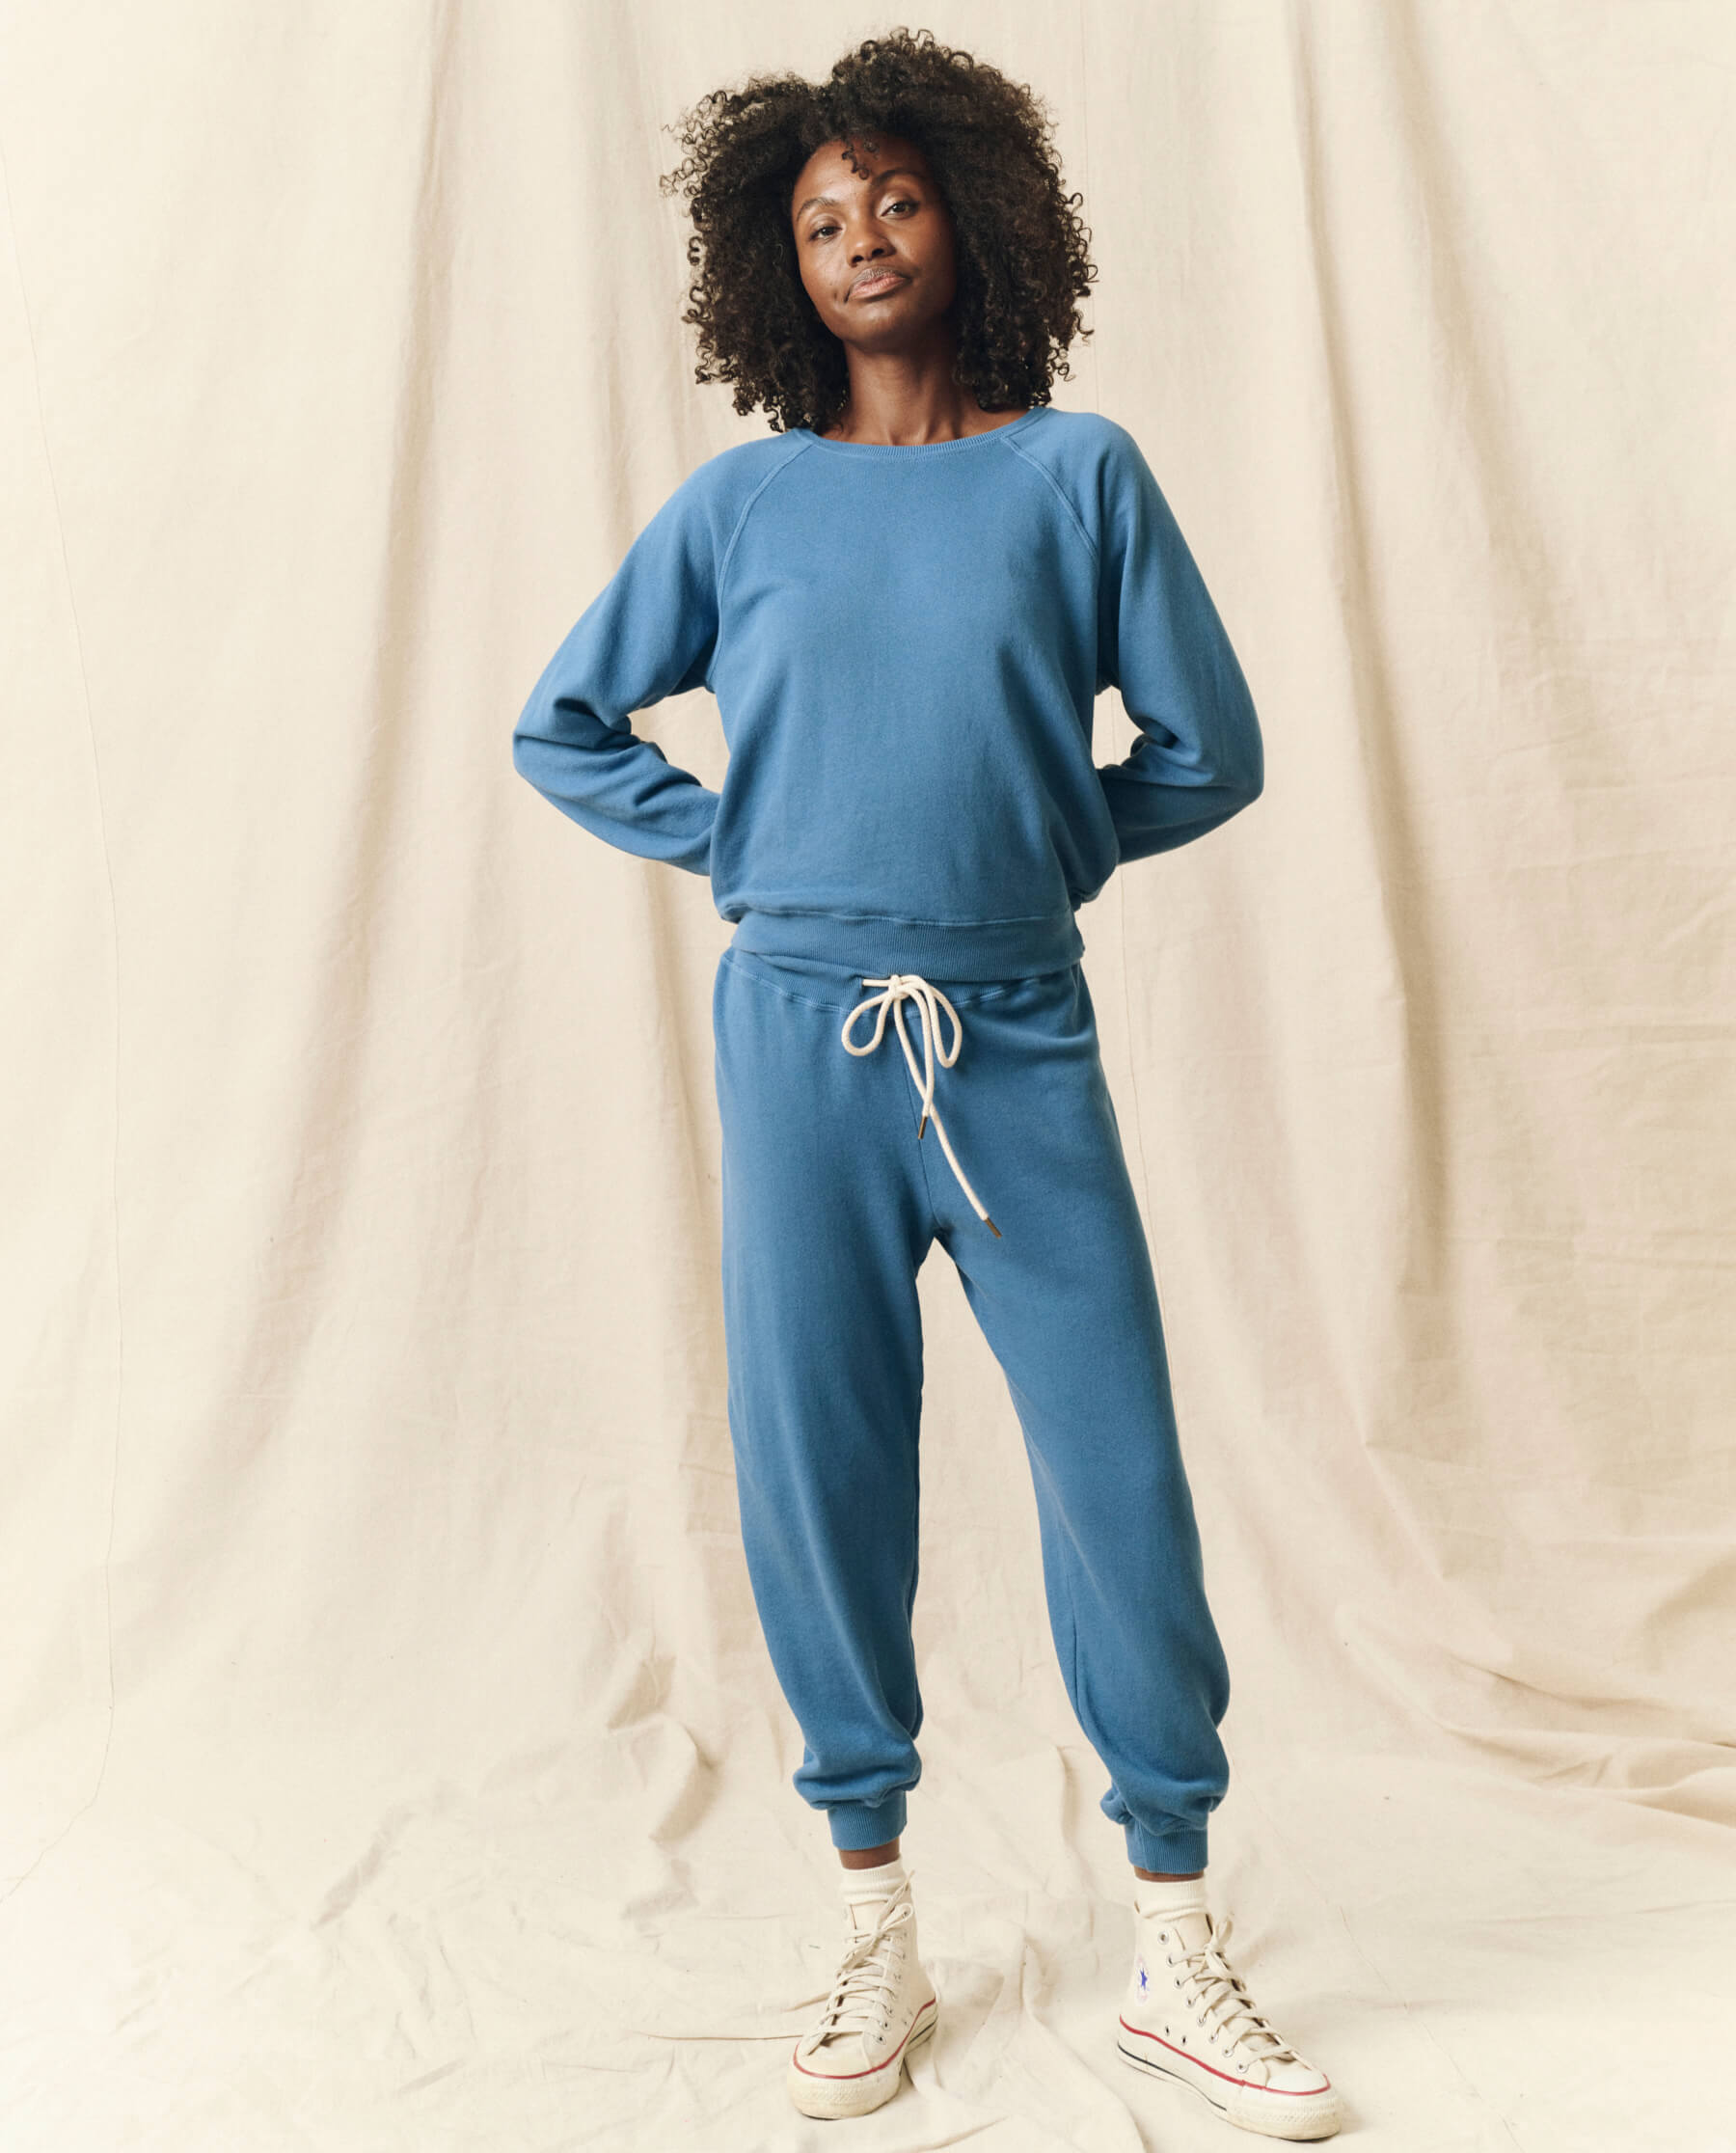 The Cropped Sweatpant. Solid -- Glacier Blue SWEATPANTS THE GREAT. HOL 23 KNITS